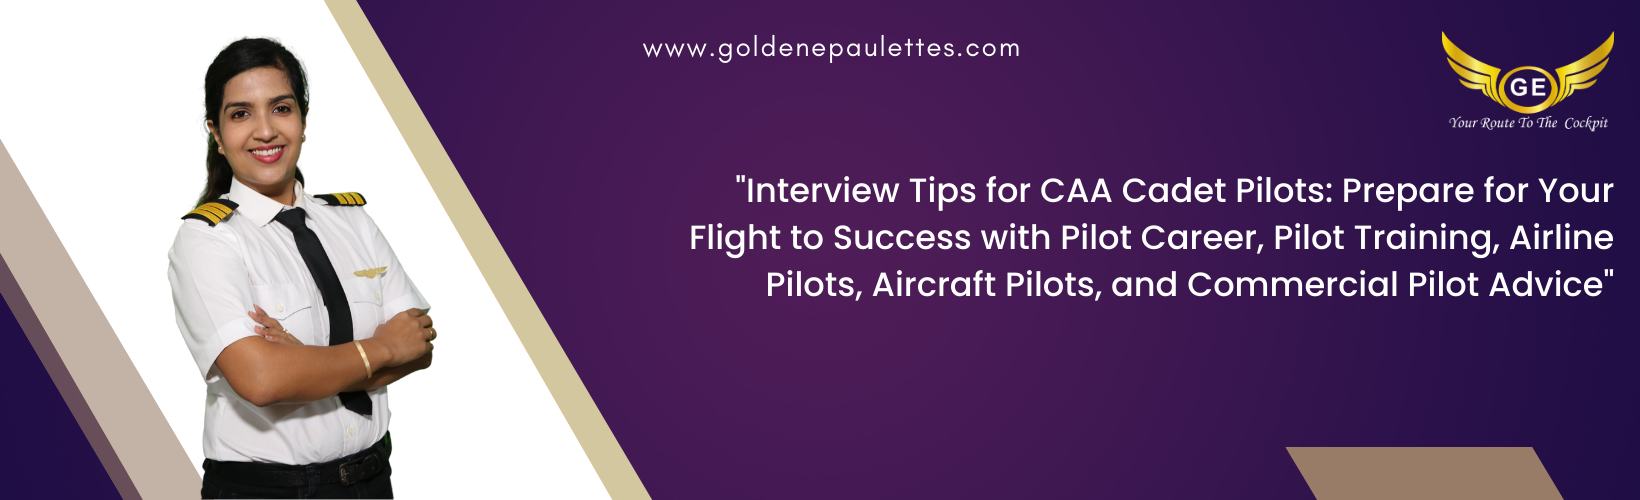 Interview Tips for CAA Cadet Pilots